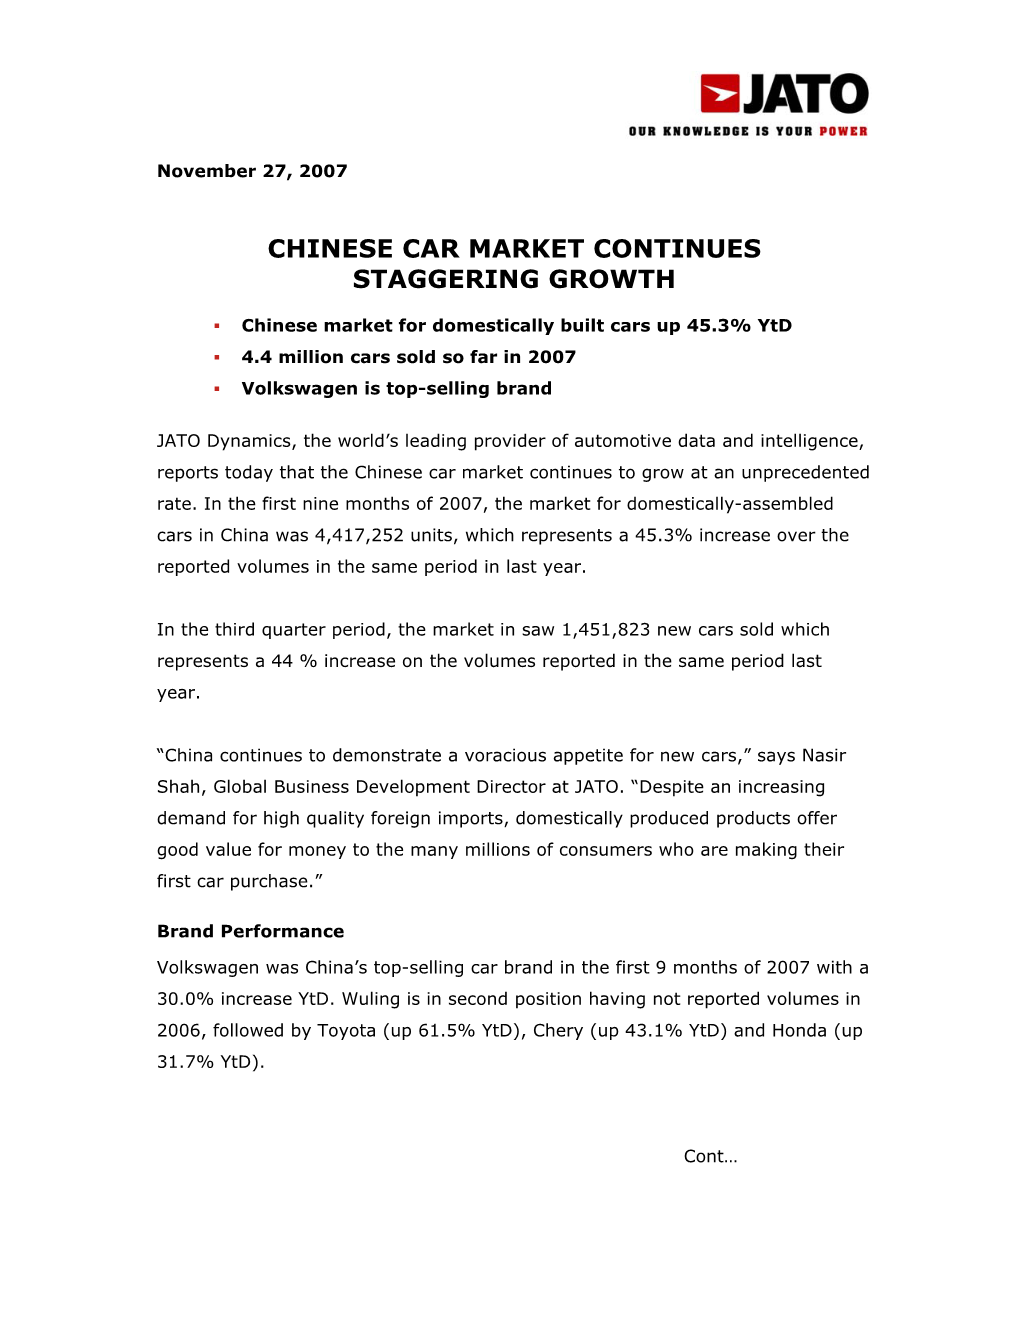 Chinese Car Market Continues Staggering Growth 27.11.2007